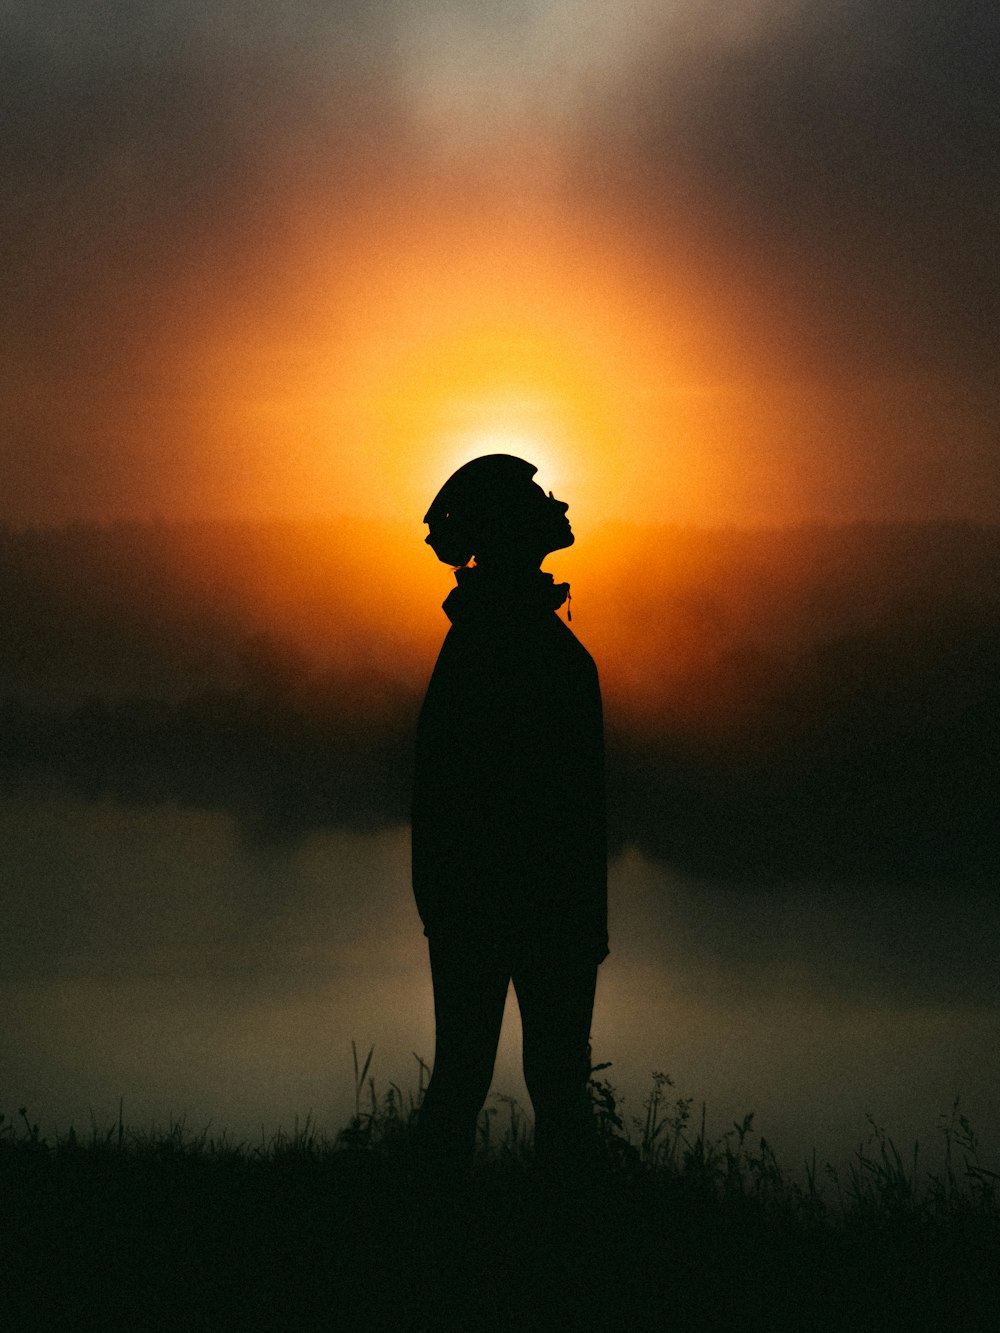 silhouette of man standing on grass field during sunset